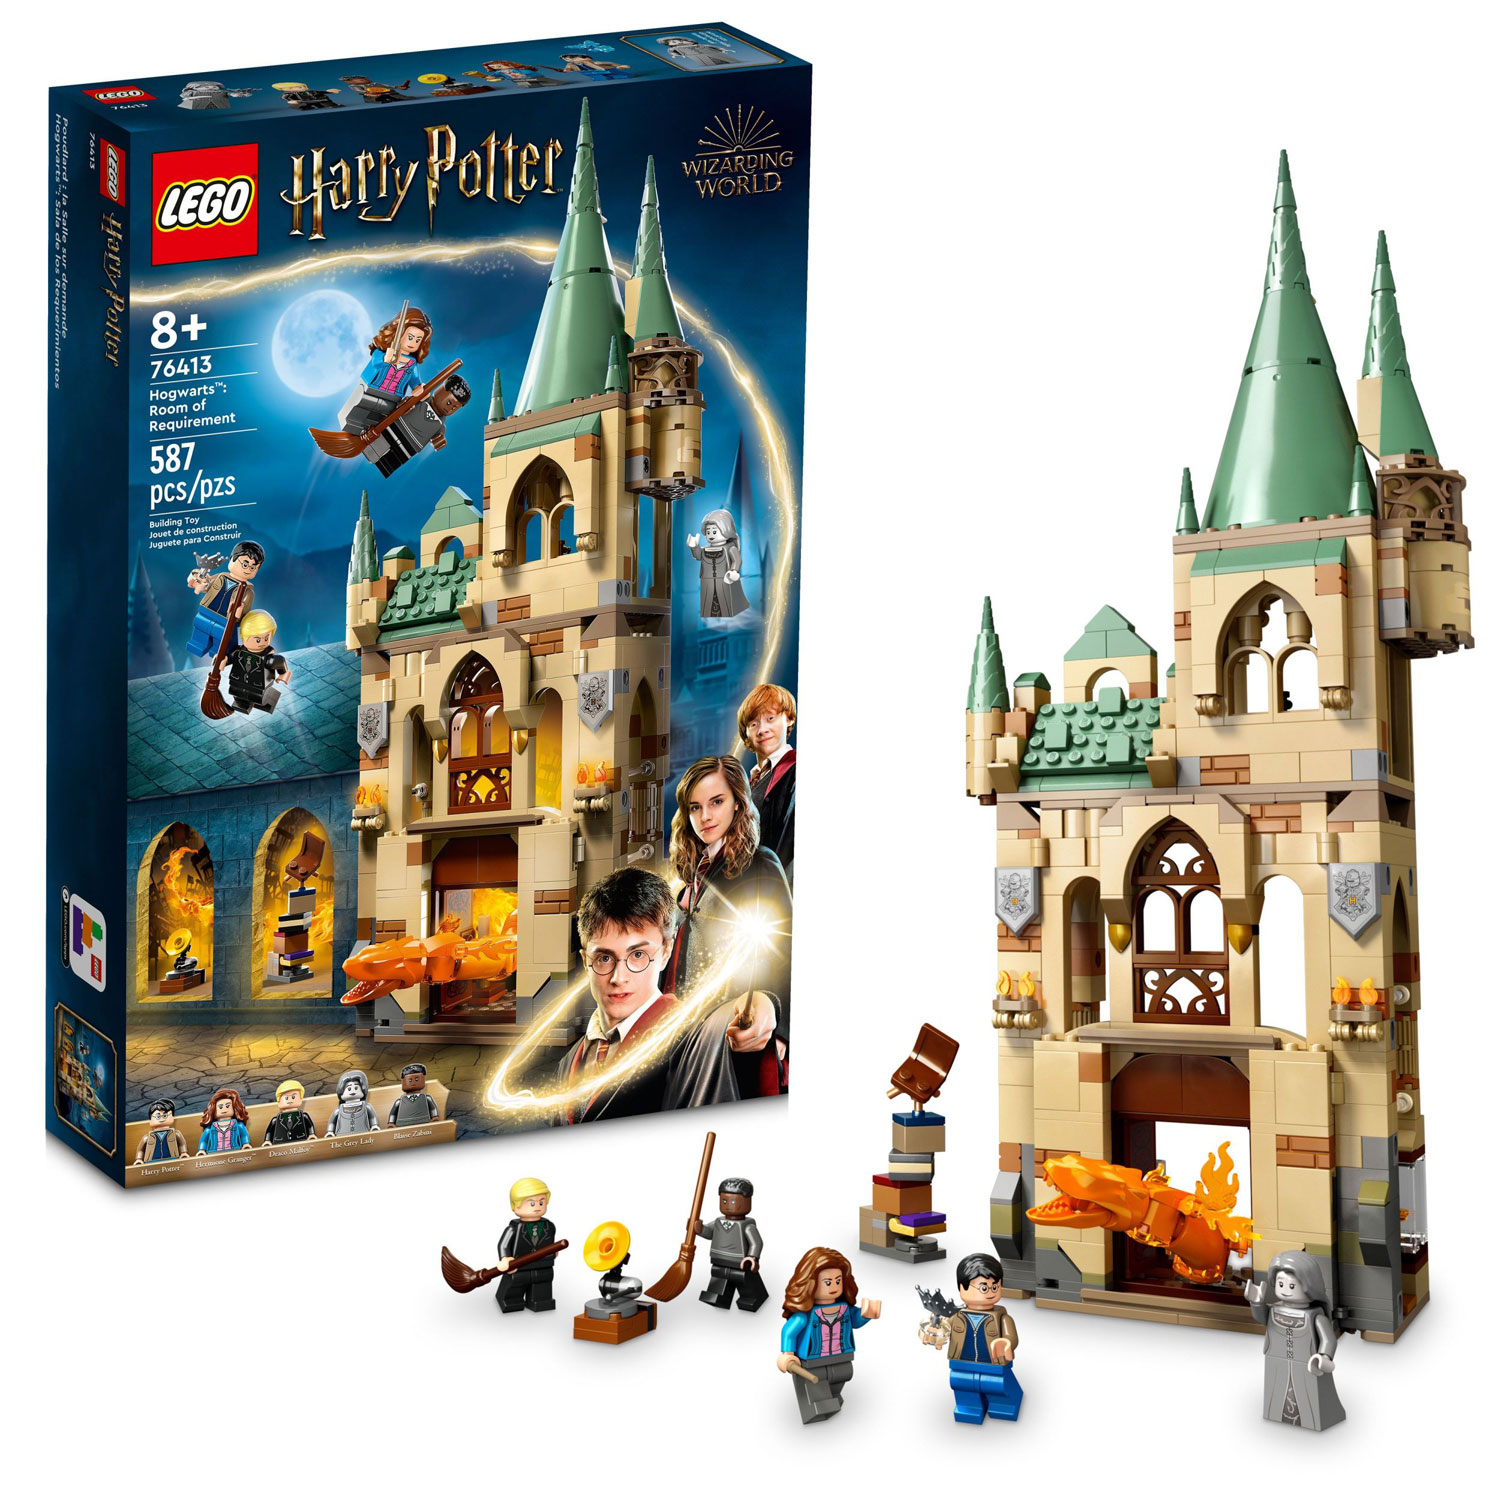 LEGO Harry Potter: Hogwarts Room Of Requirement - 587 Pieces (76413)